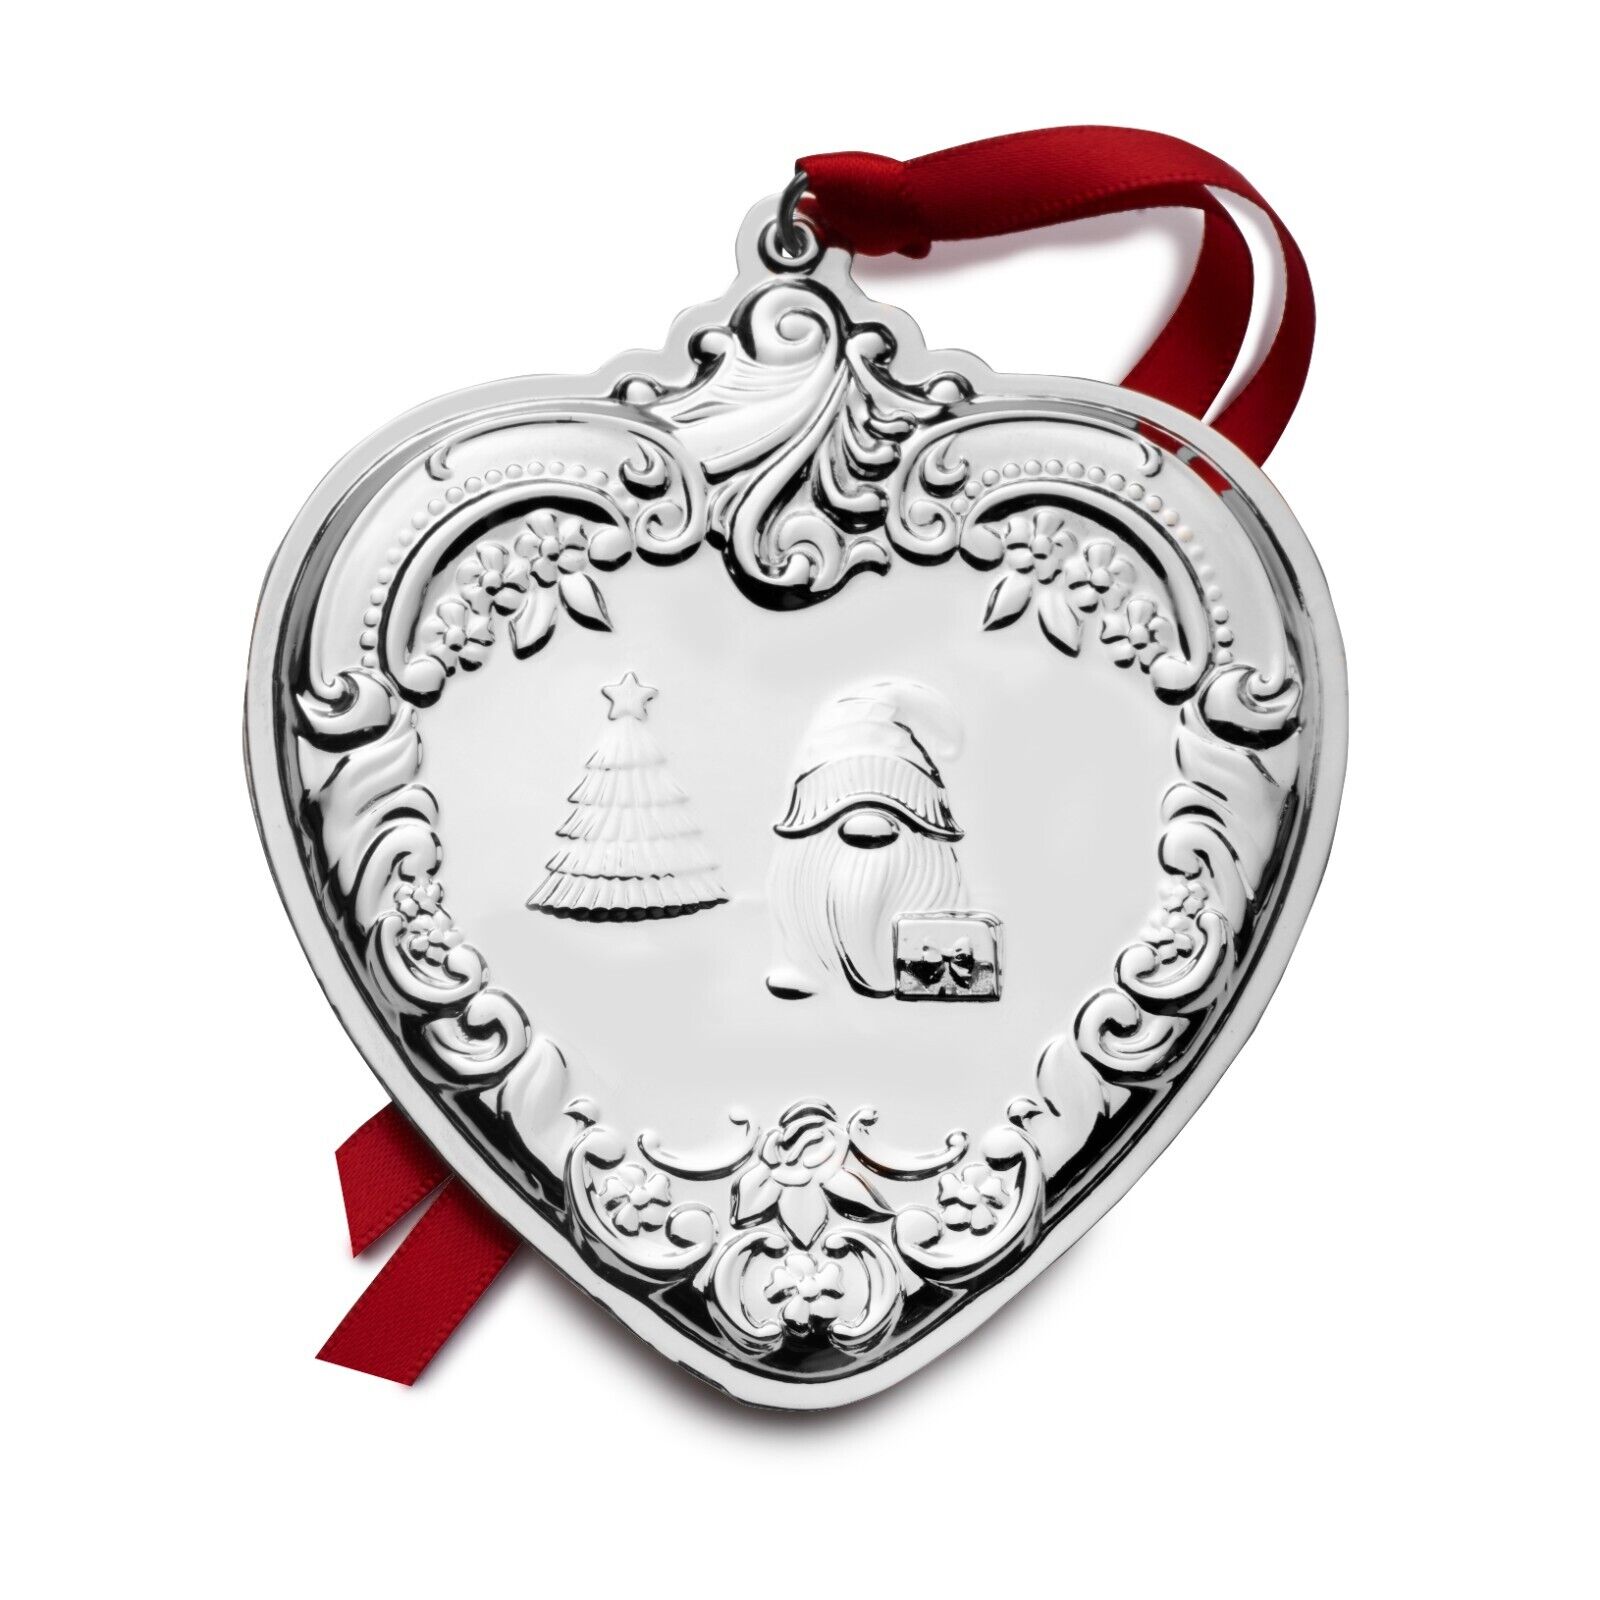 Wallace 2023 Annual sterling silver Heart Ornament, 32nd Edition,NEW in Box